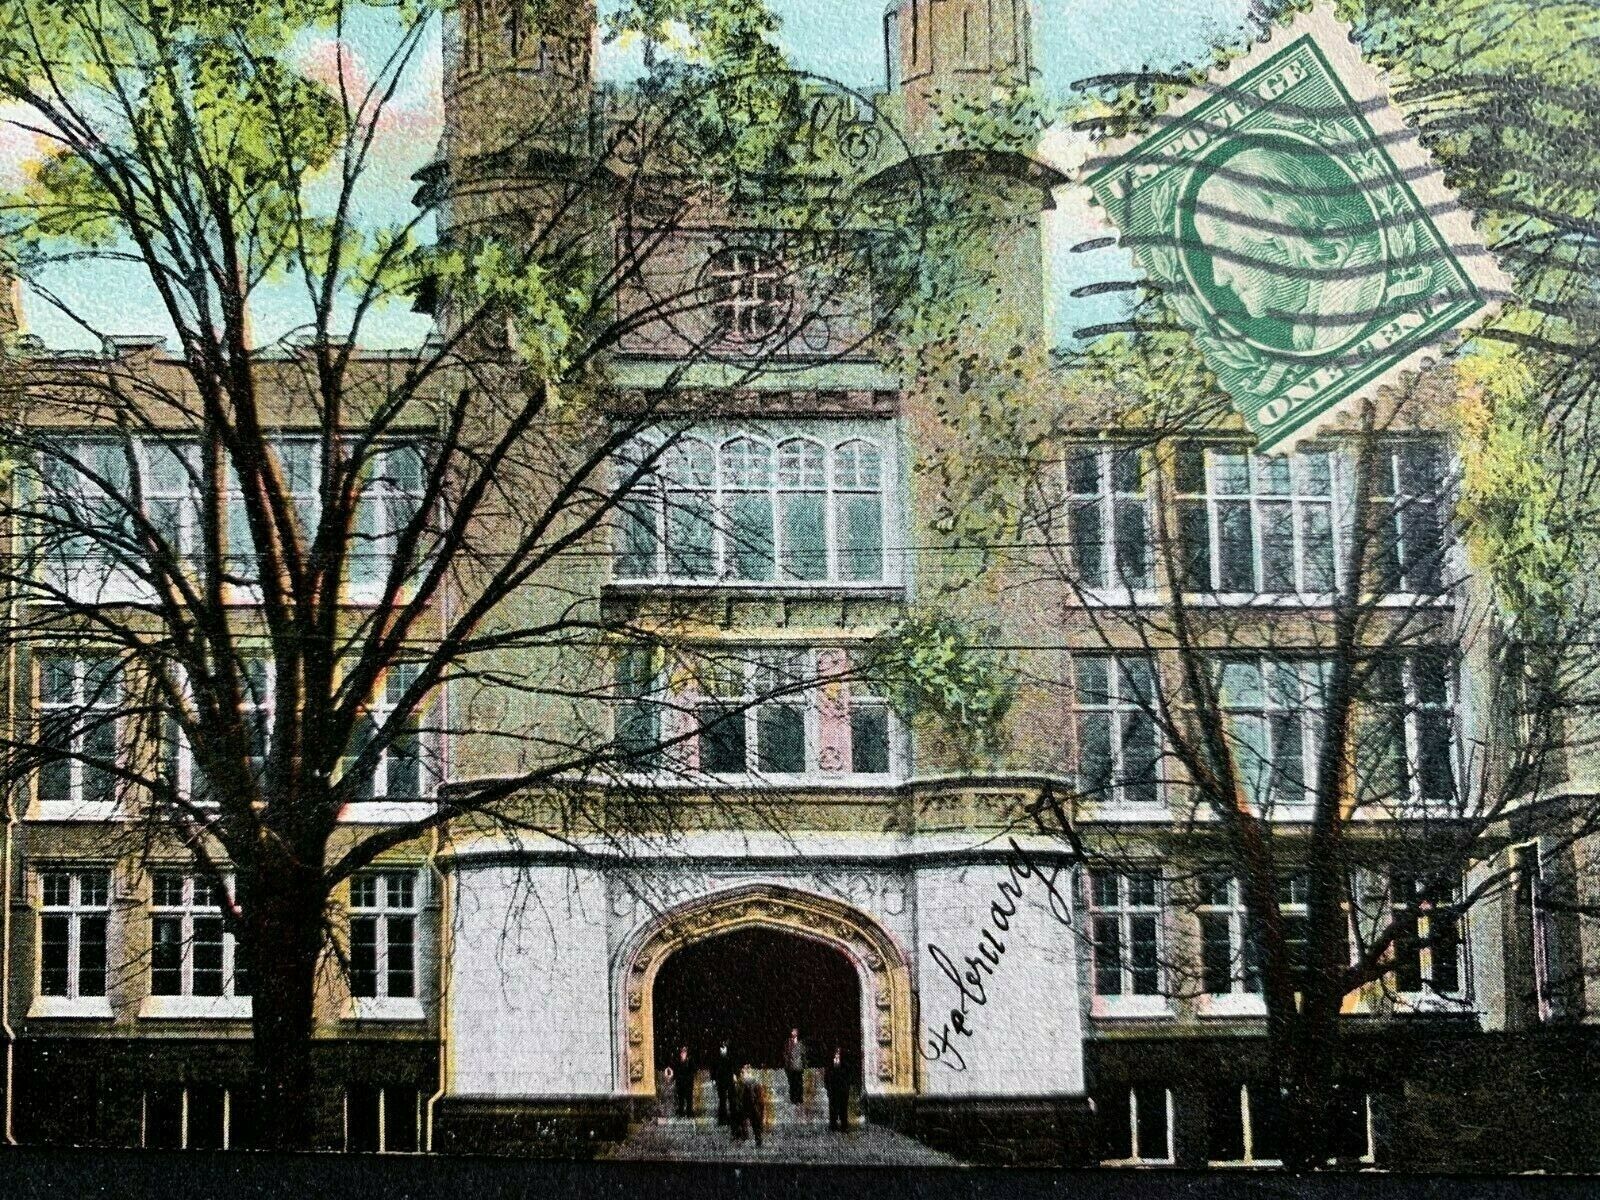 Postcard White Plains NY - High School with Students on Stairs